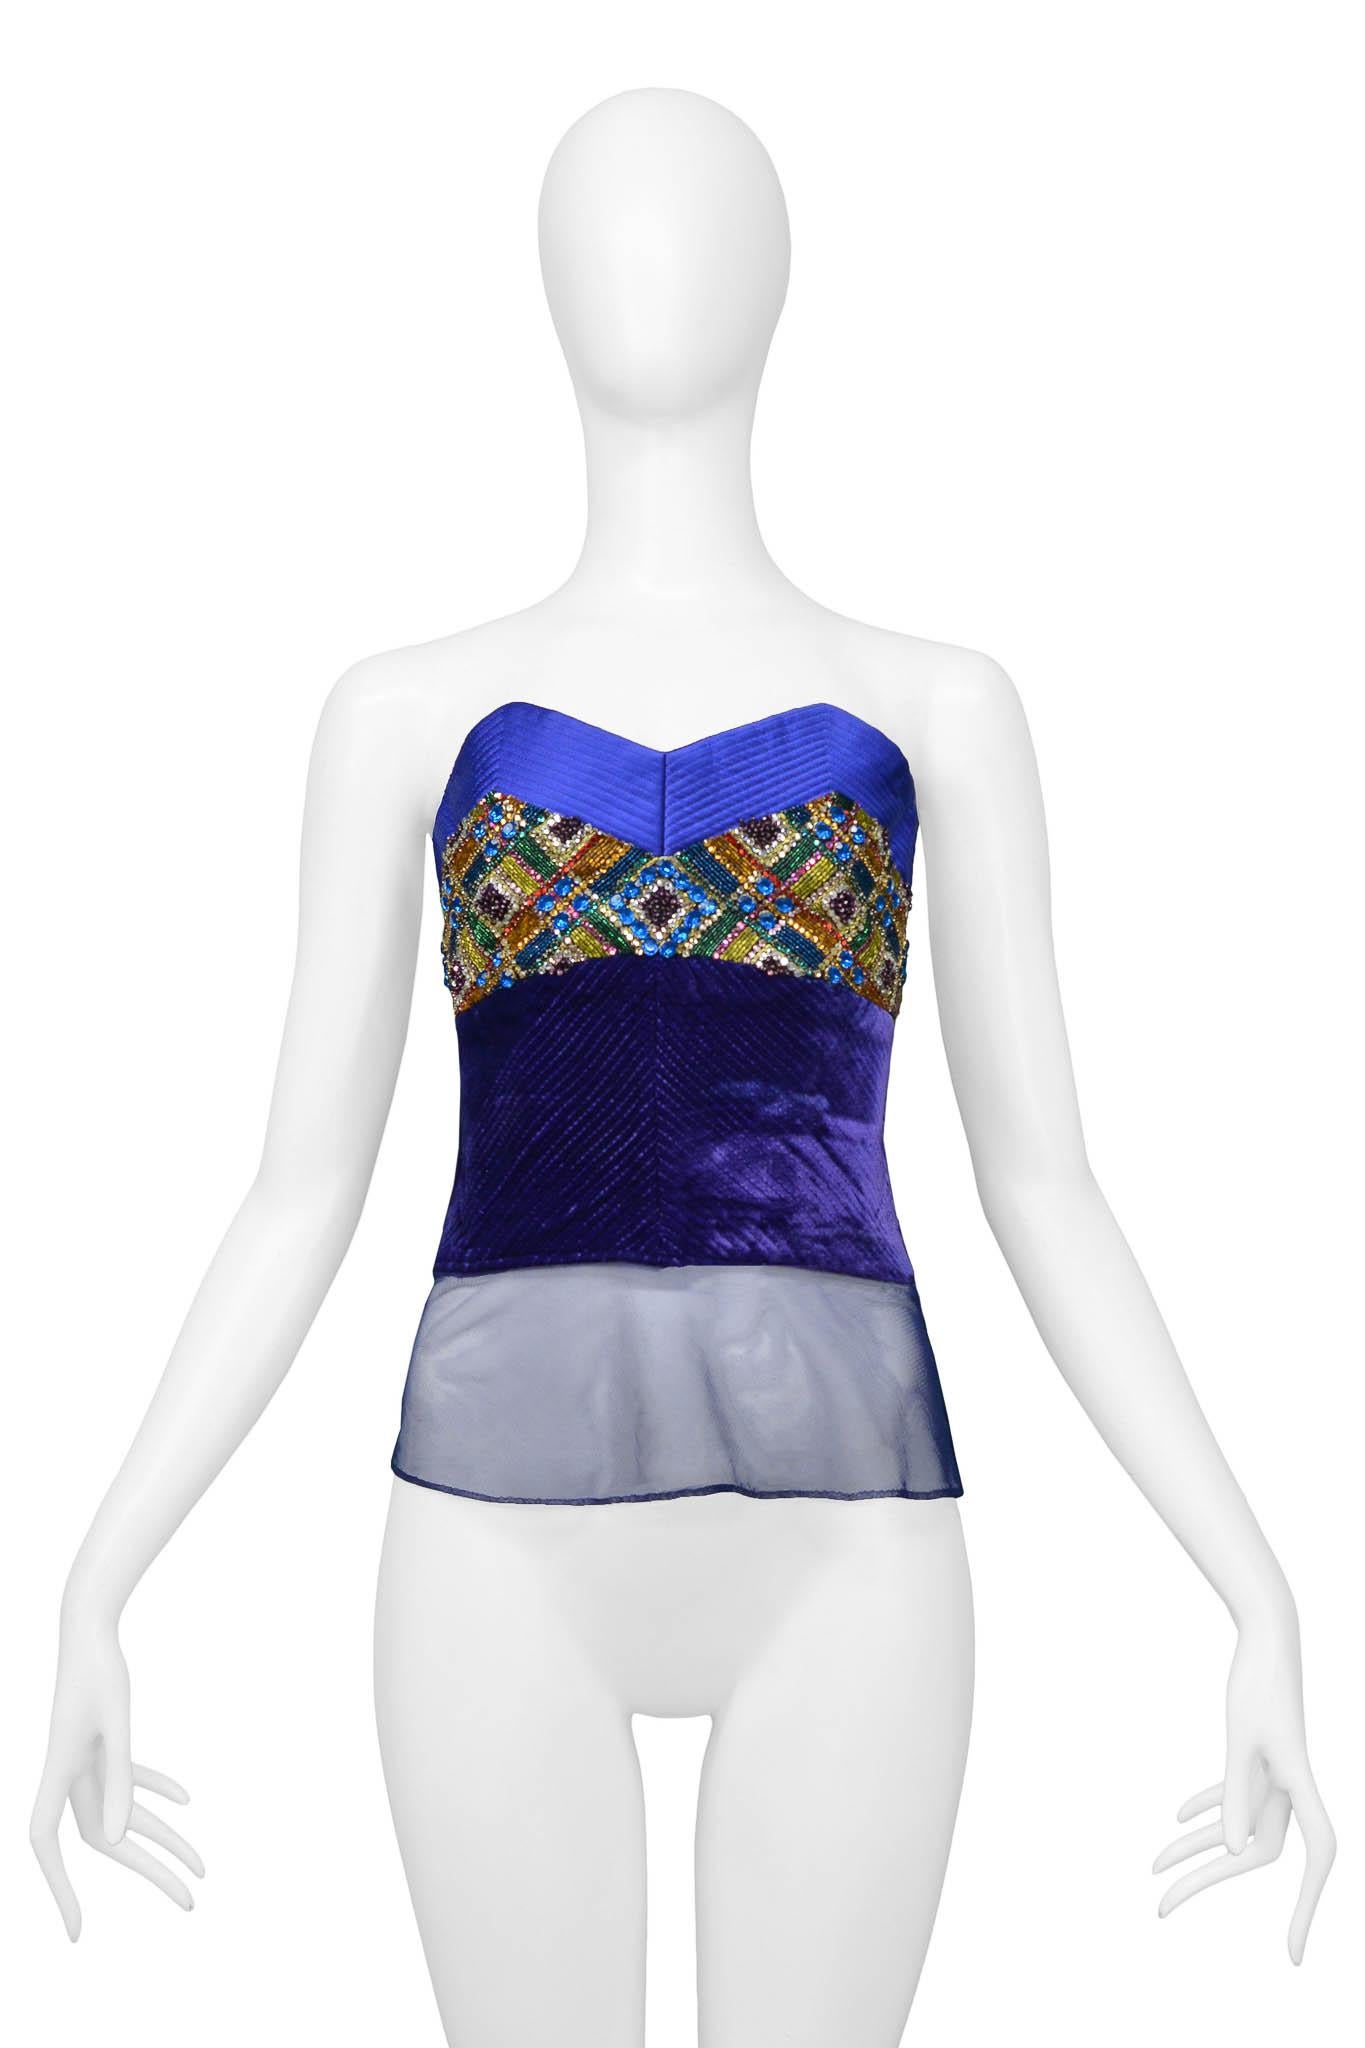 Resurrection is excited to offer a vintage Gianni Versace blue satin and purple velvet Versace Couture bustier featuring an intricate multicolor rhinestone design, mesh hem, and decorative topstitching. 

Versace
Size Tag Missing 
Measurements:
Bust